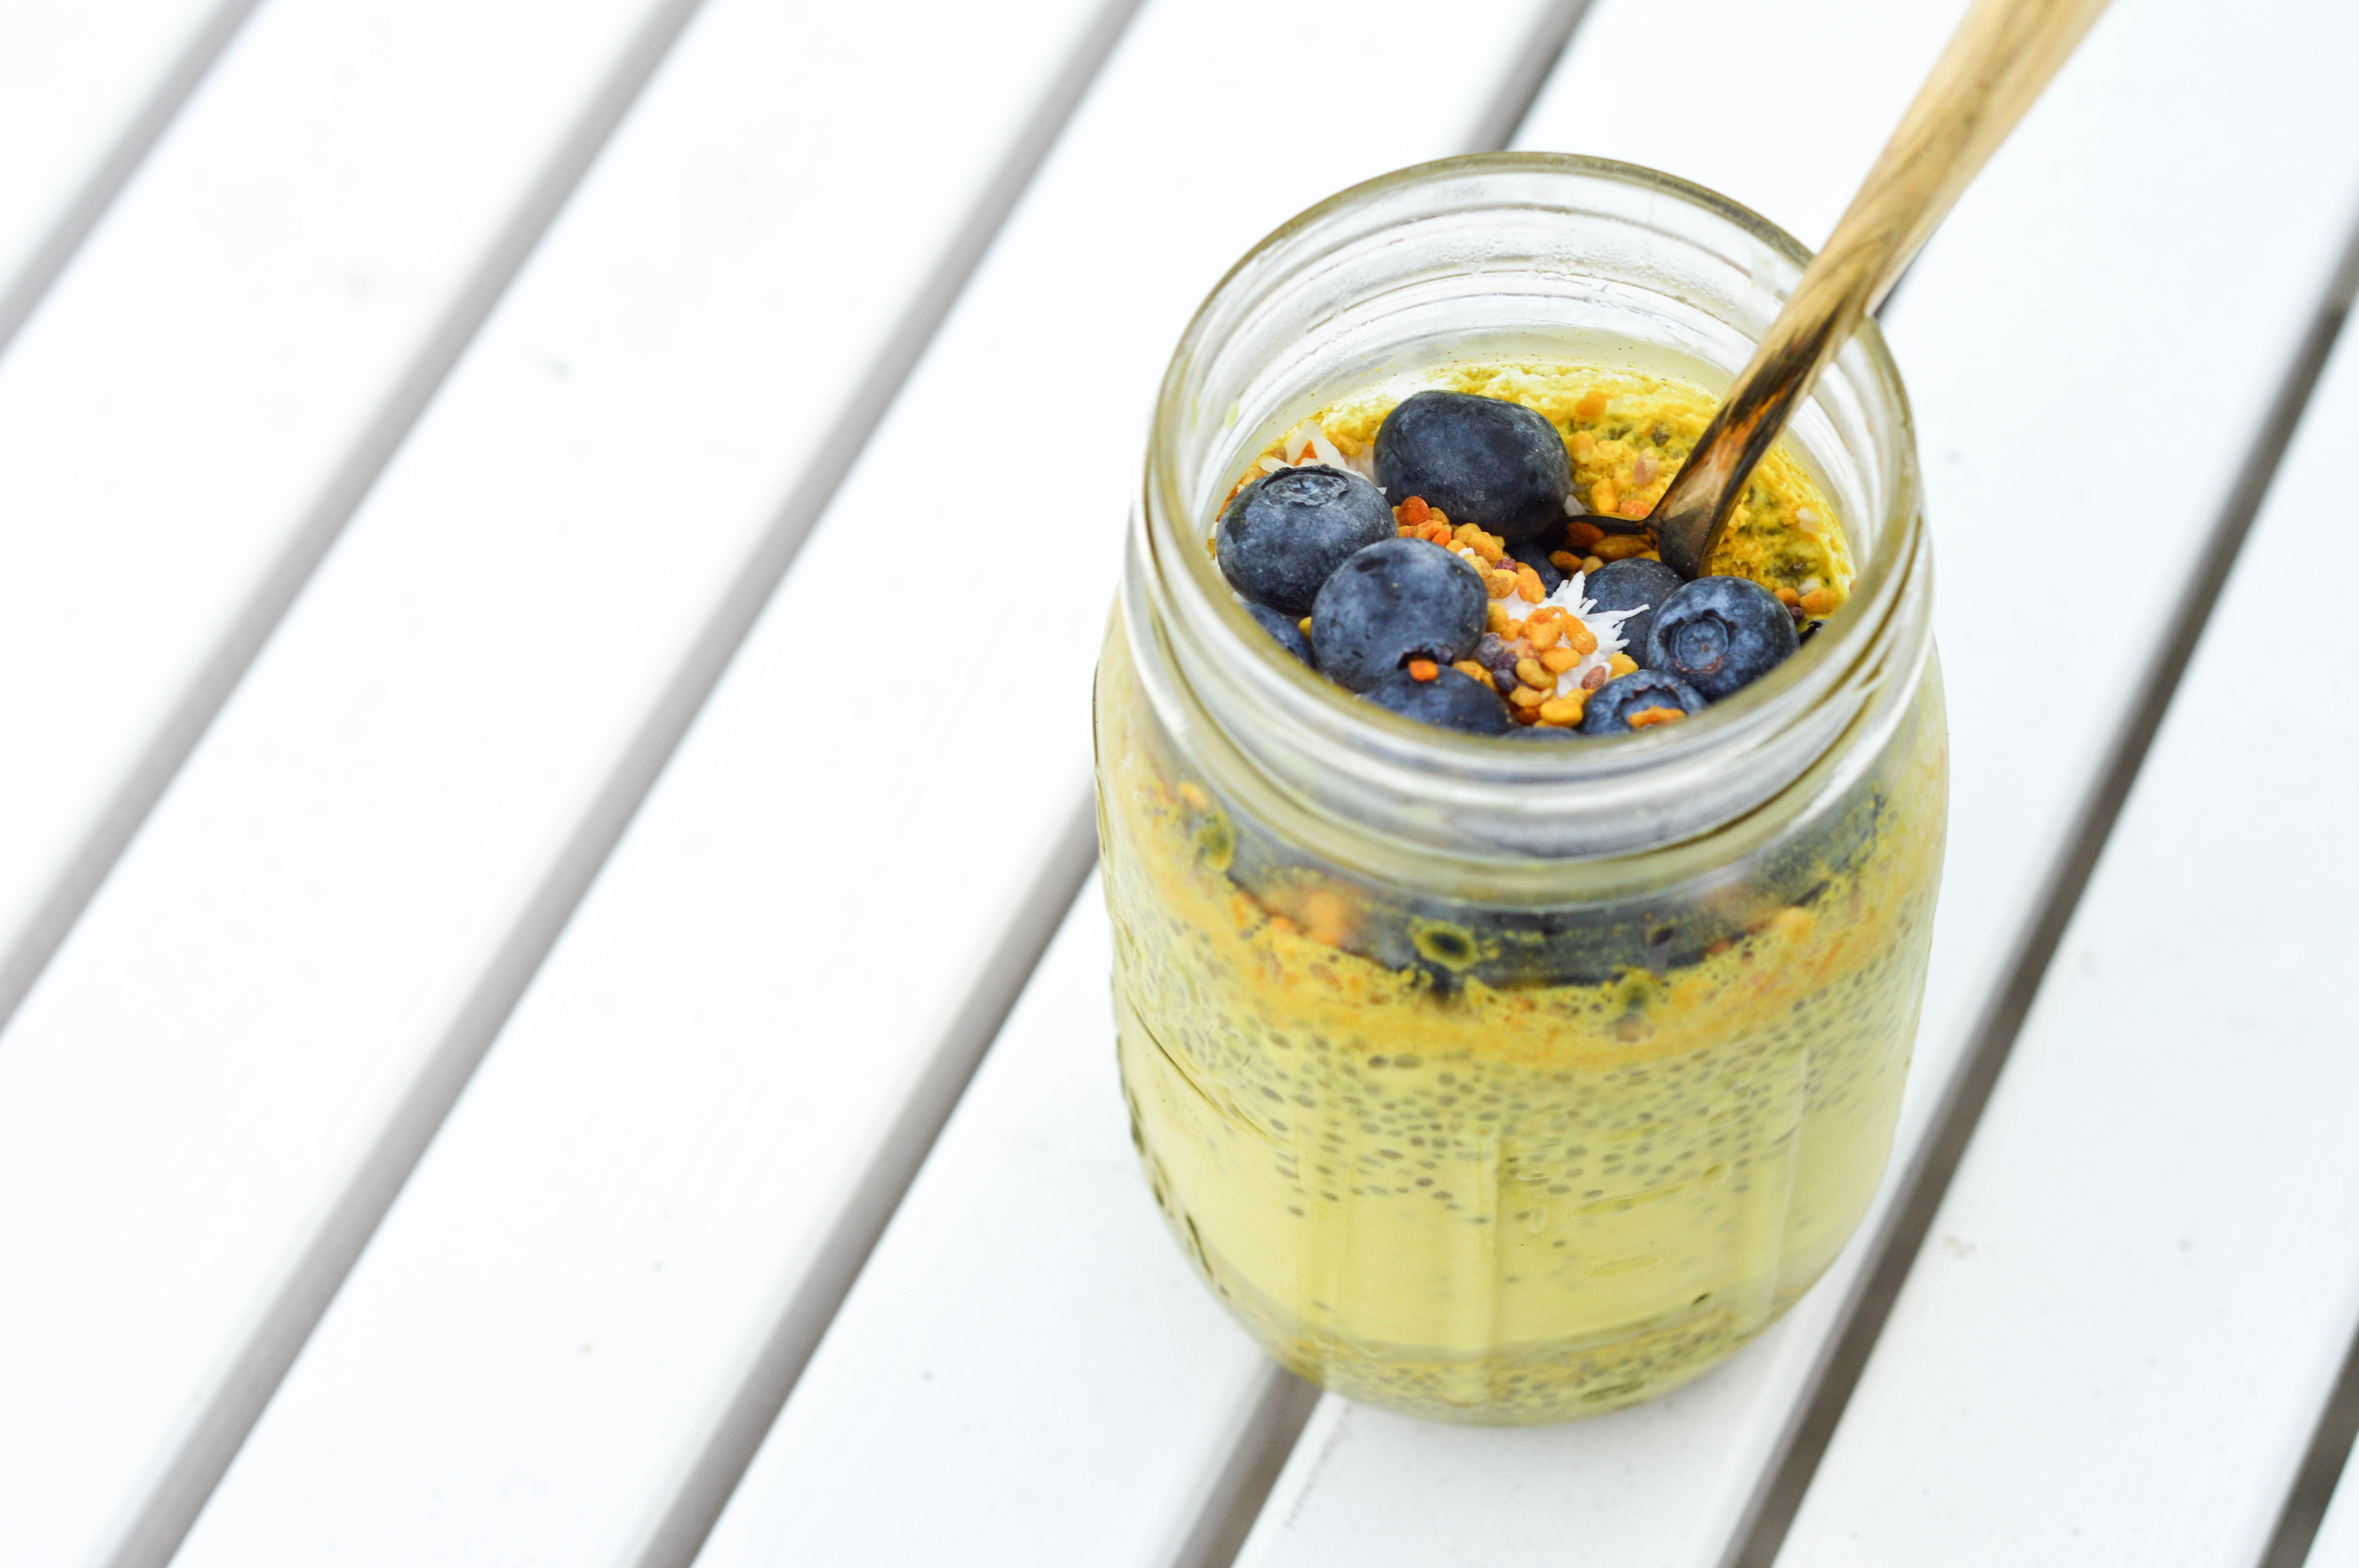 golden milk chia seed pudding